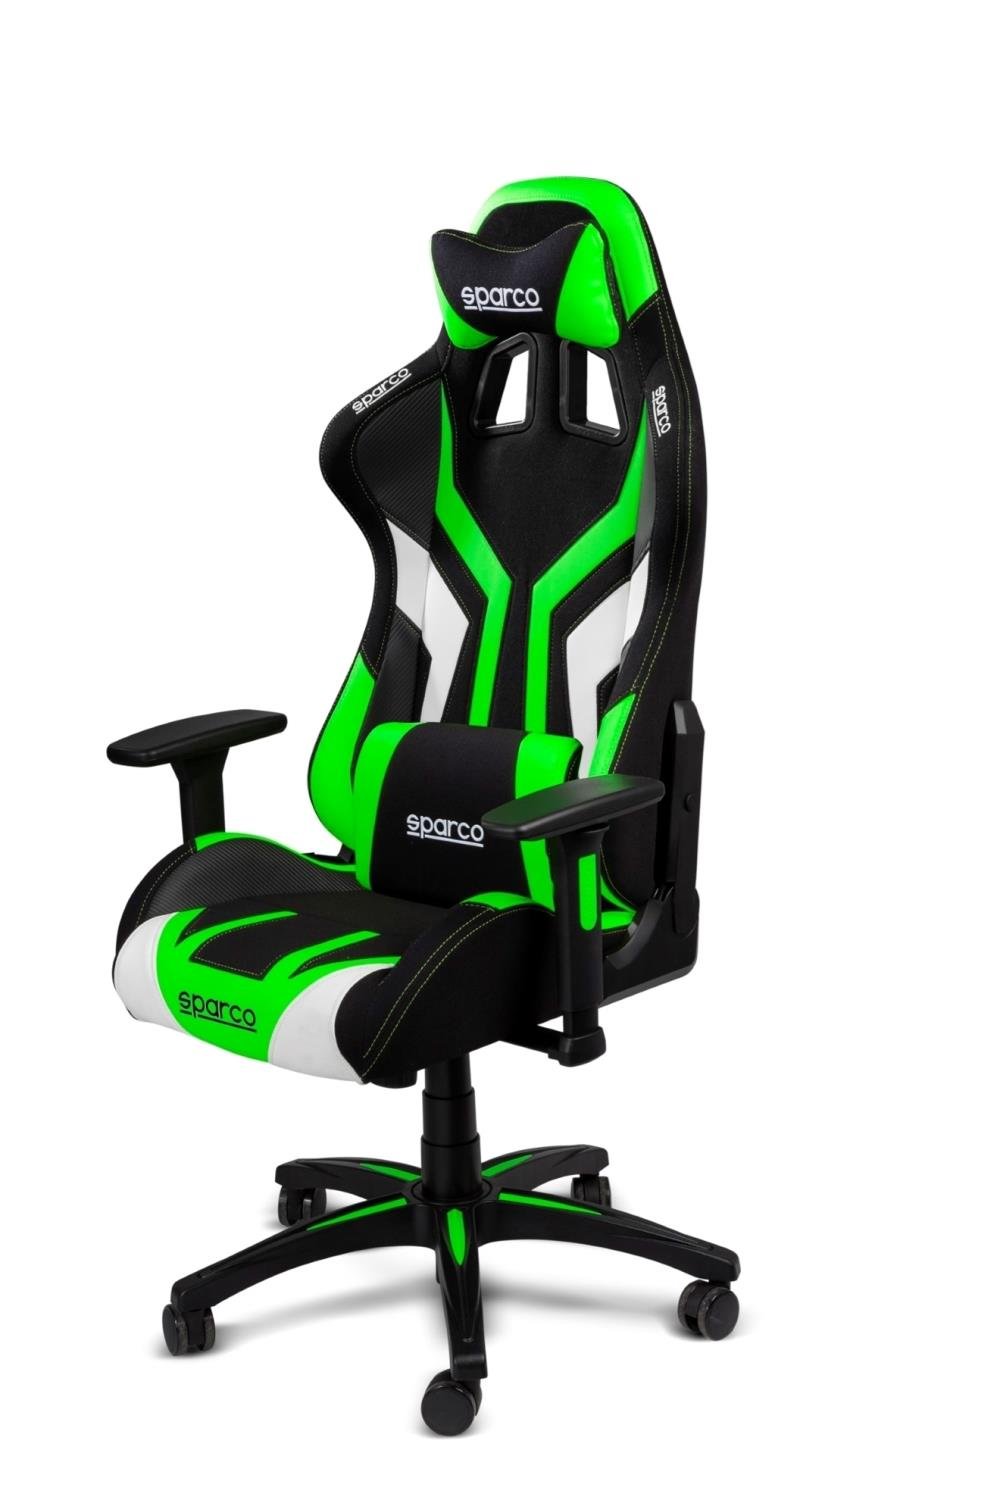 Sparco Torino Series Gaming Chair